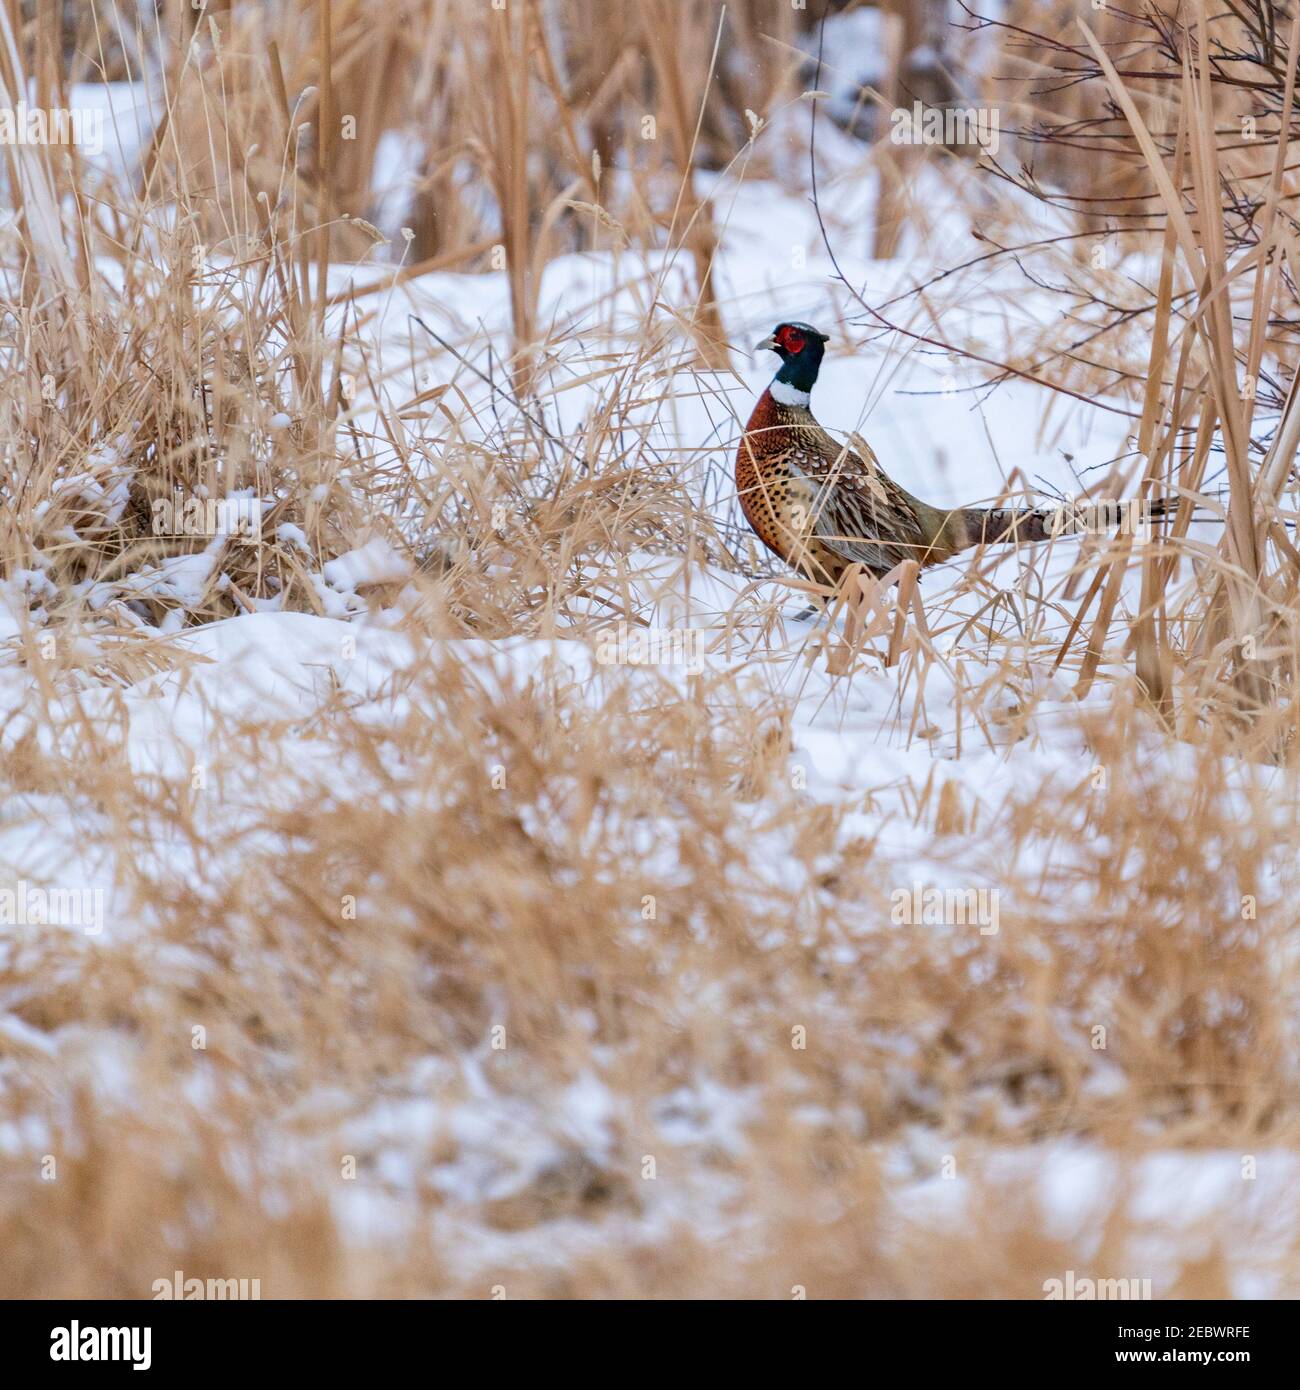 USA, Idaho, Bellevue, Male rooster pheasant in snowy field Stock Photo